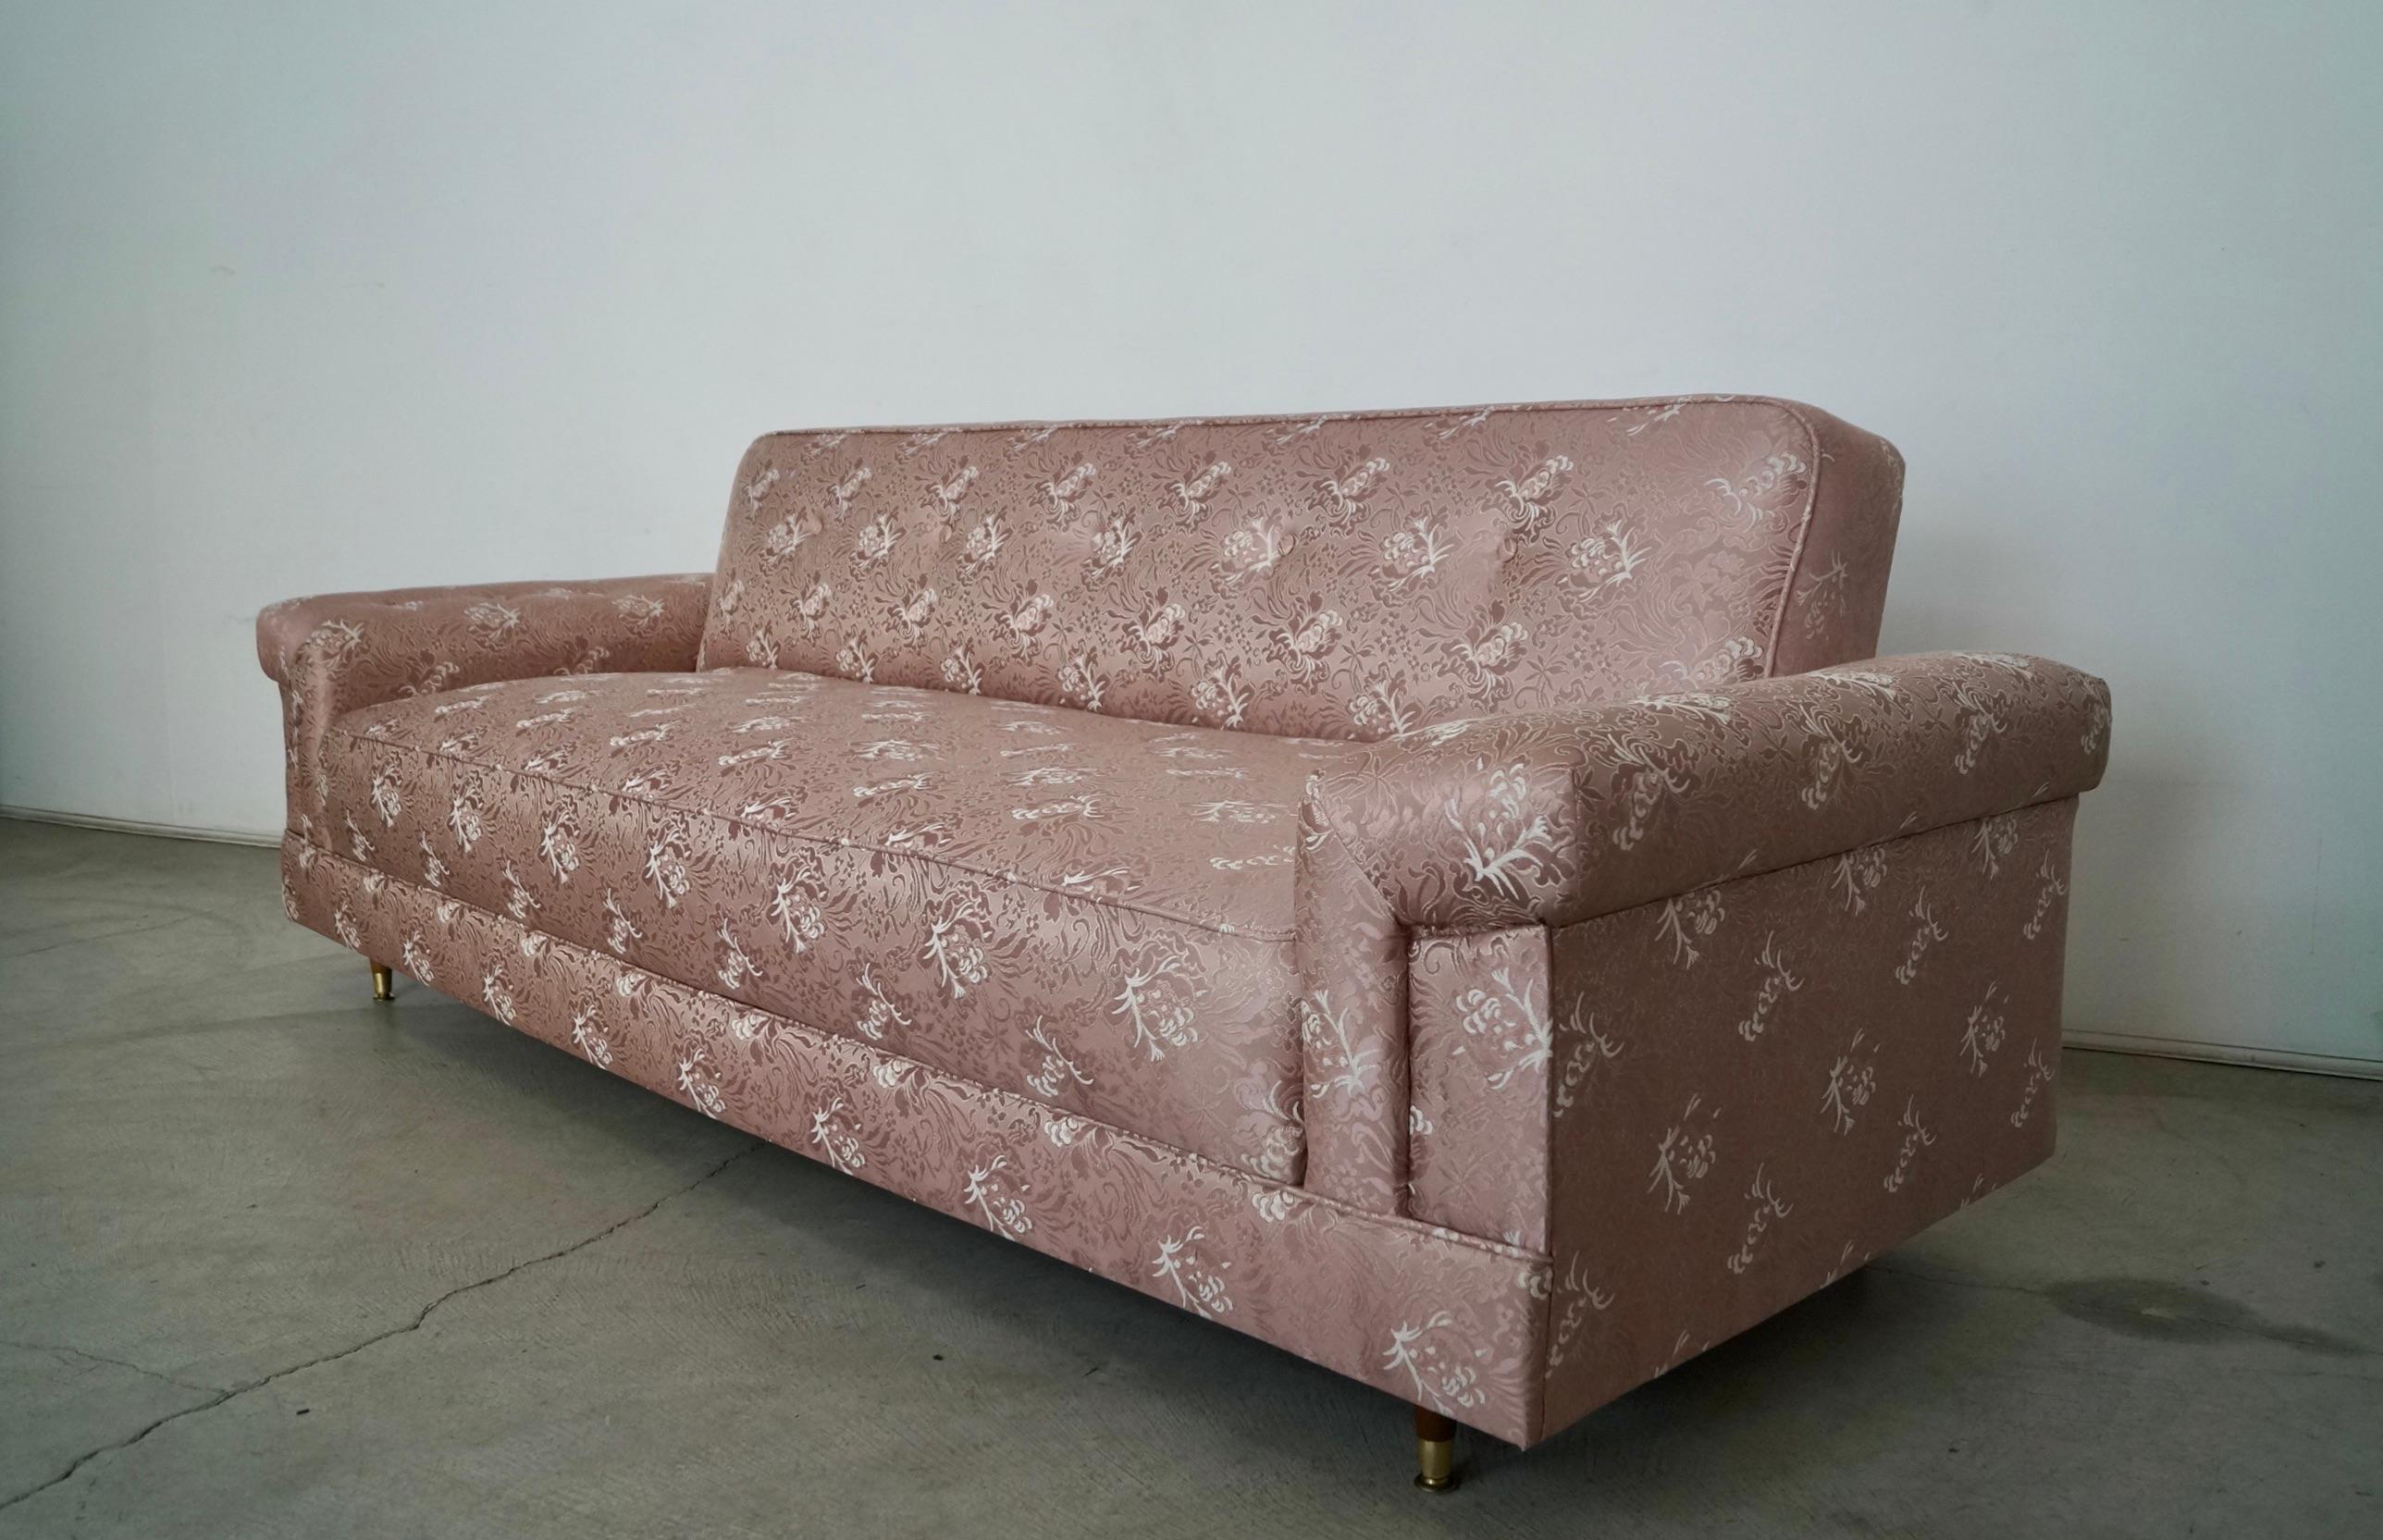 1950's Mid-Century Modern Folding Daybed / Sofa In Excellent Condition For Sale In Burbank, CA